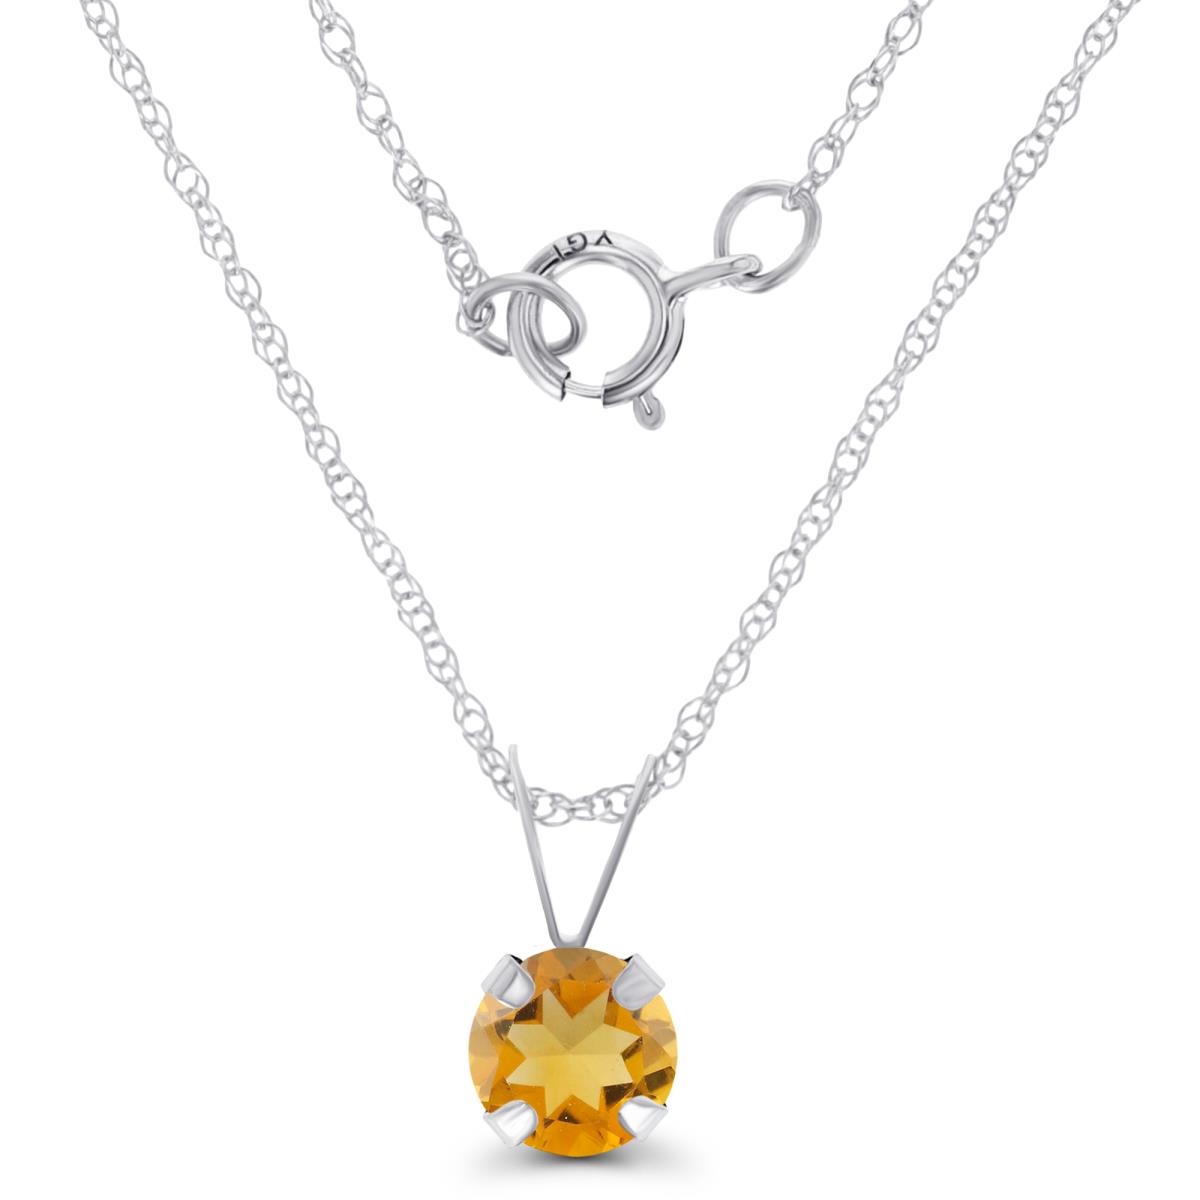 14K White Gold 5mm Round Citrine 18" Rope Chain Necklace